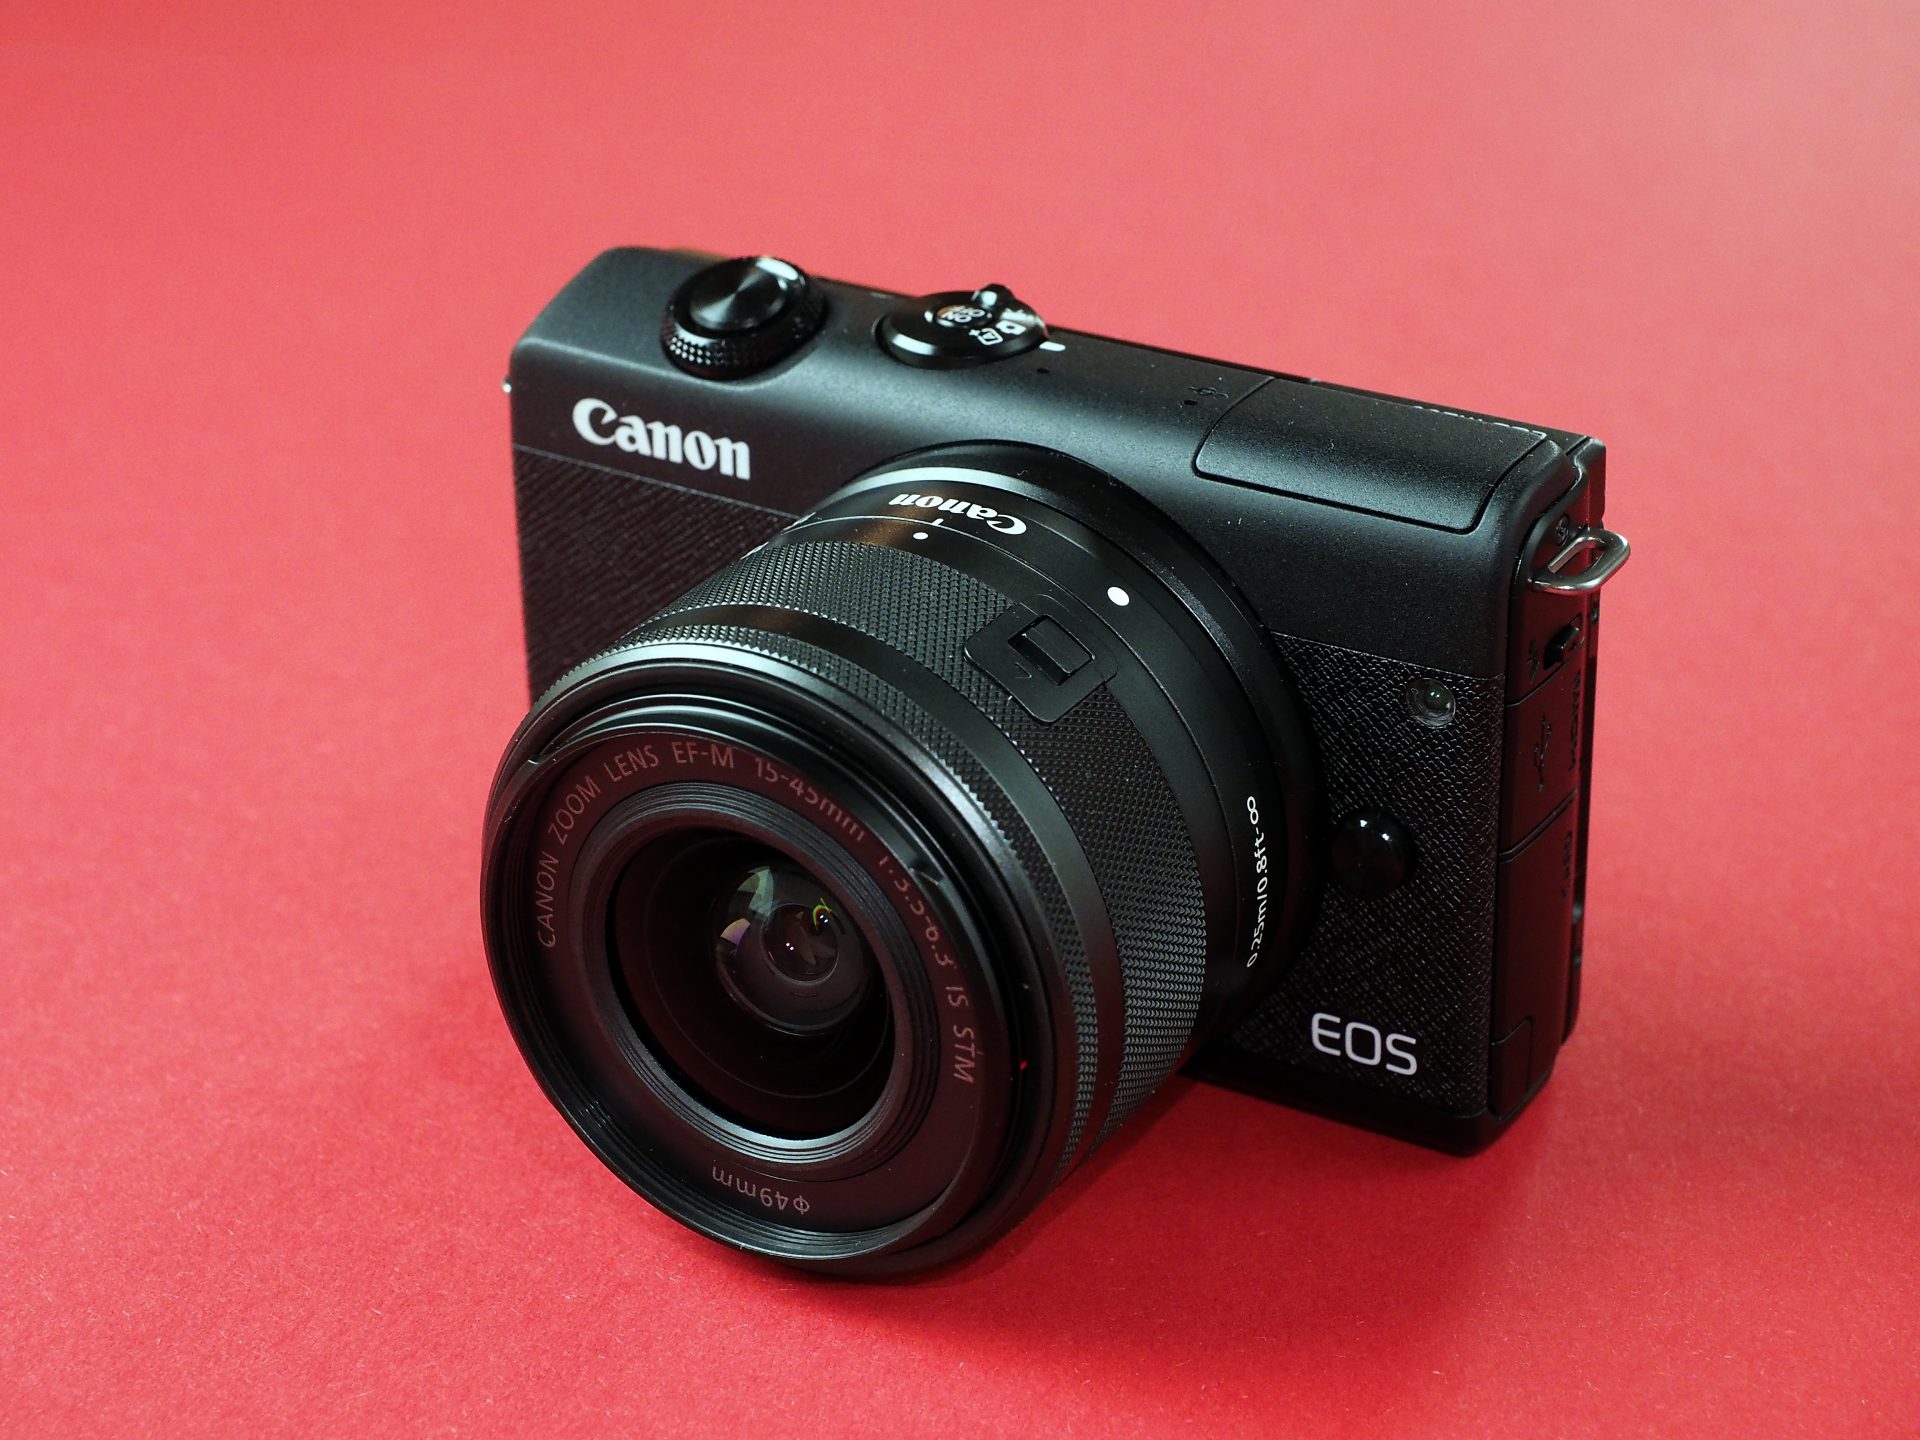 fred kollision lilla TEST: Canon EOS M200 – For nemhedens skyld